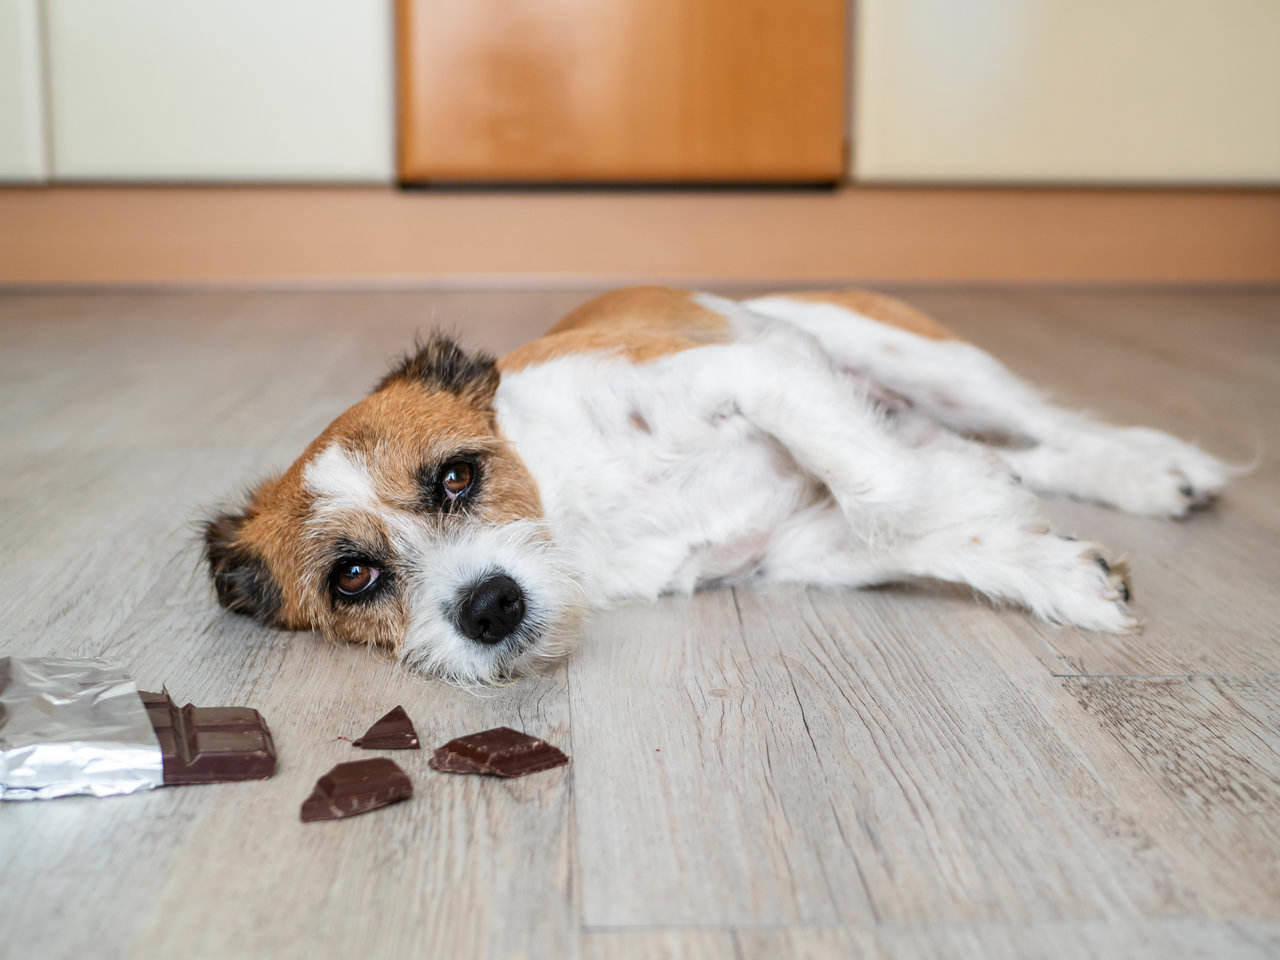 #NAME Why cant dogs eat chocolate? Why is it bad for them?